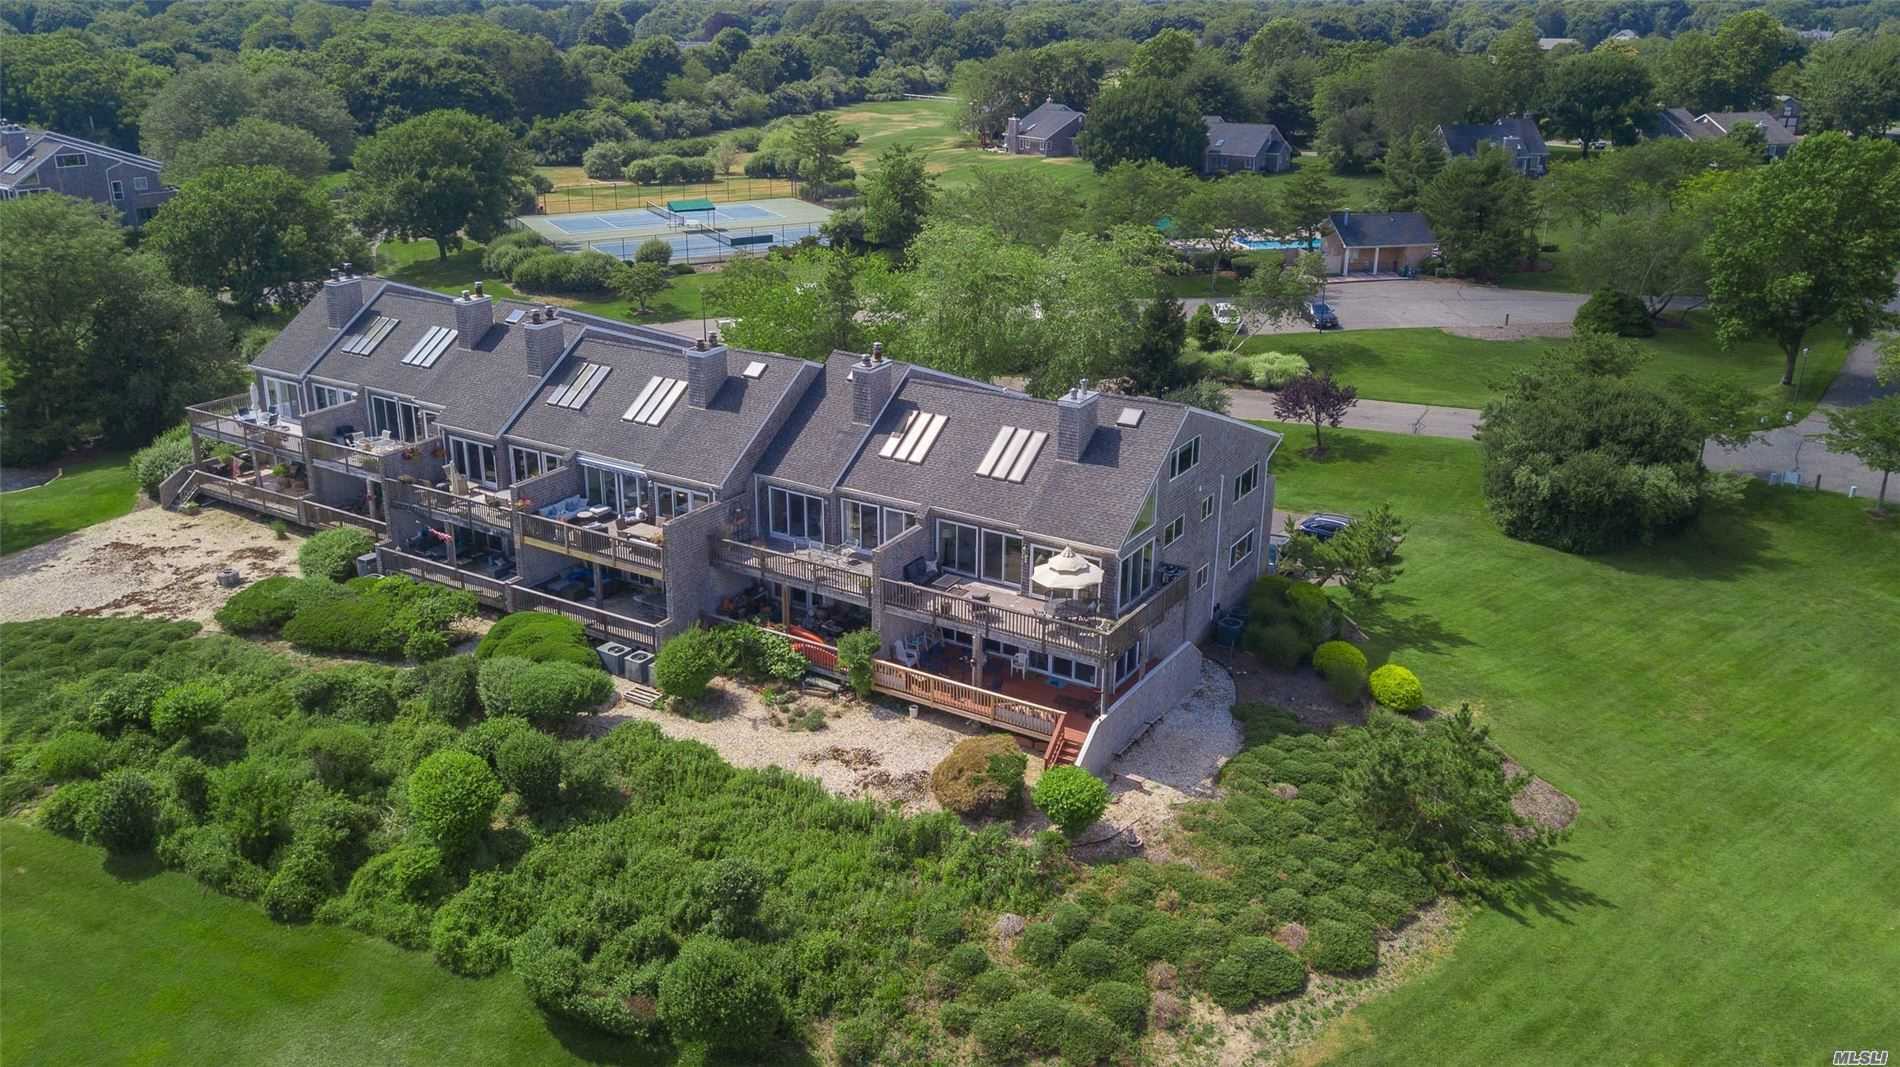 Elegant, Stunning, and Gorgeous UPPER END UNIT in Sought after Harts Cove! Breathtaking Views of Moriches Bay, 2 Ponds with Nature Watching Galore, & the endless Sky! Radiant Heated Floors, Magnificent Stone Fireplace, Custom Baths & Tile work throughout, Exquisite lighting & High End Kitchen! Wine Cellar is truly an artisan Crafted find! Heated Pool, Boat Slip, Horses & Tennis - What More would you Want or Need to Call Home? Be Careful what you Wish For - You Will Fall In Love!